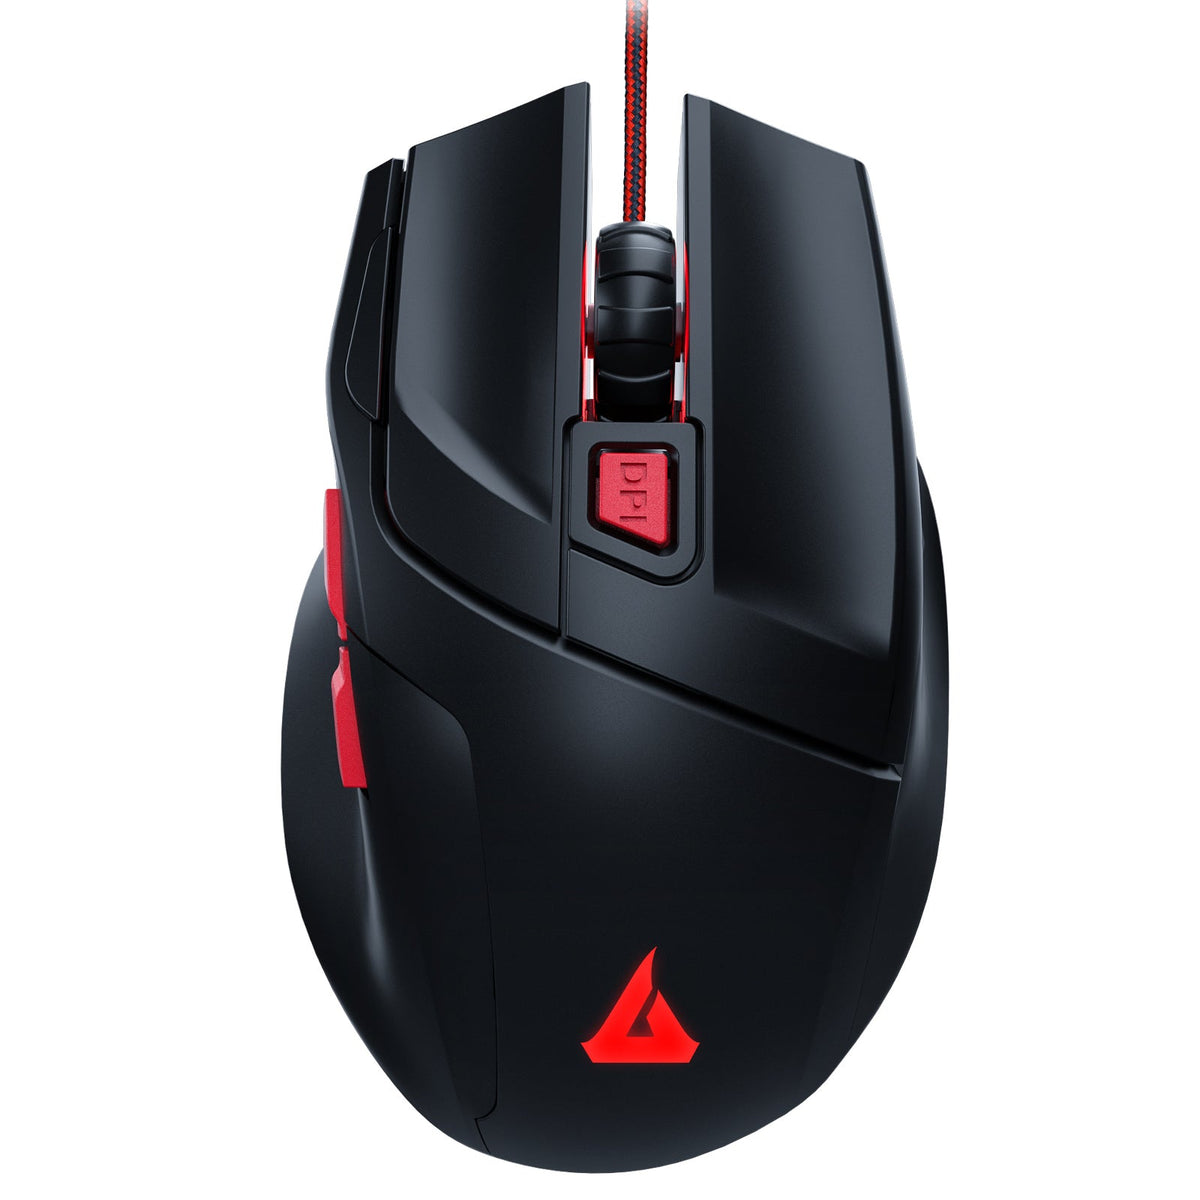 Wired RGB Programmable Gaming Mouse GT790